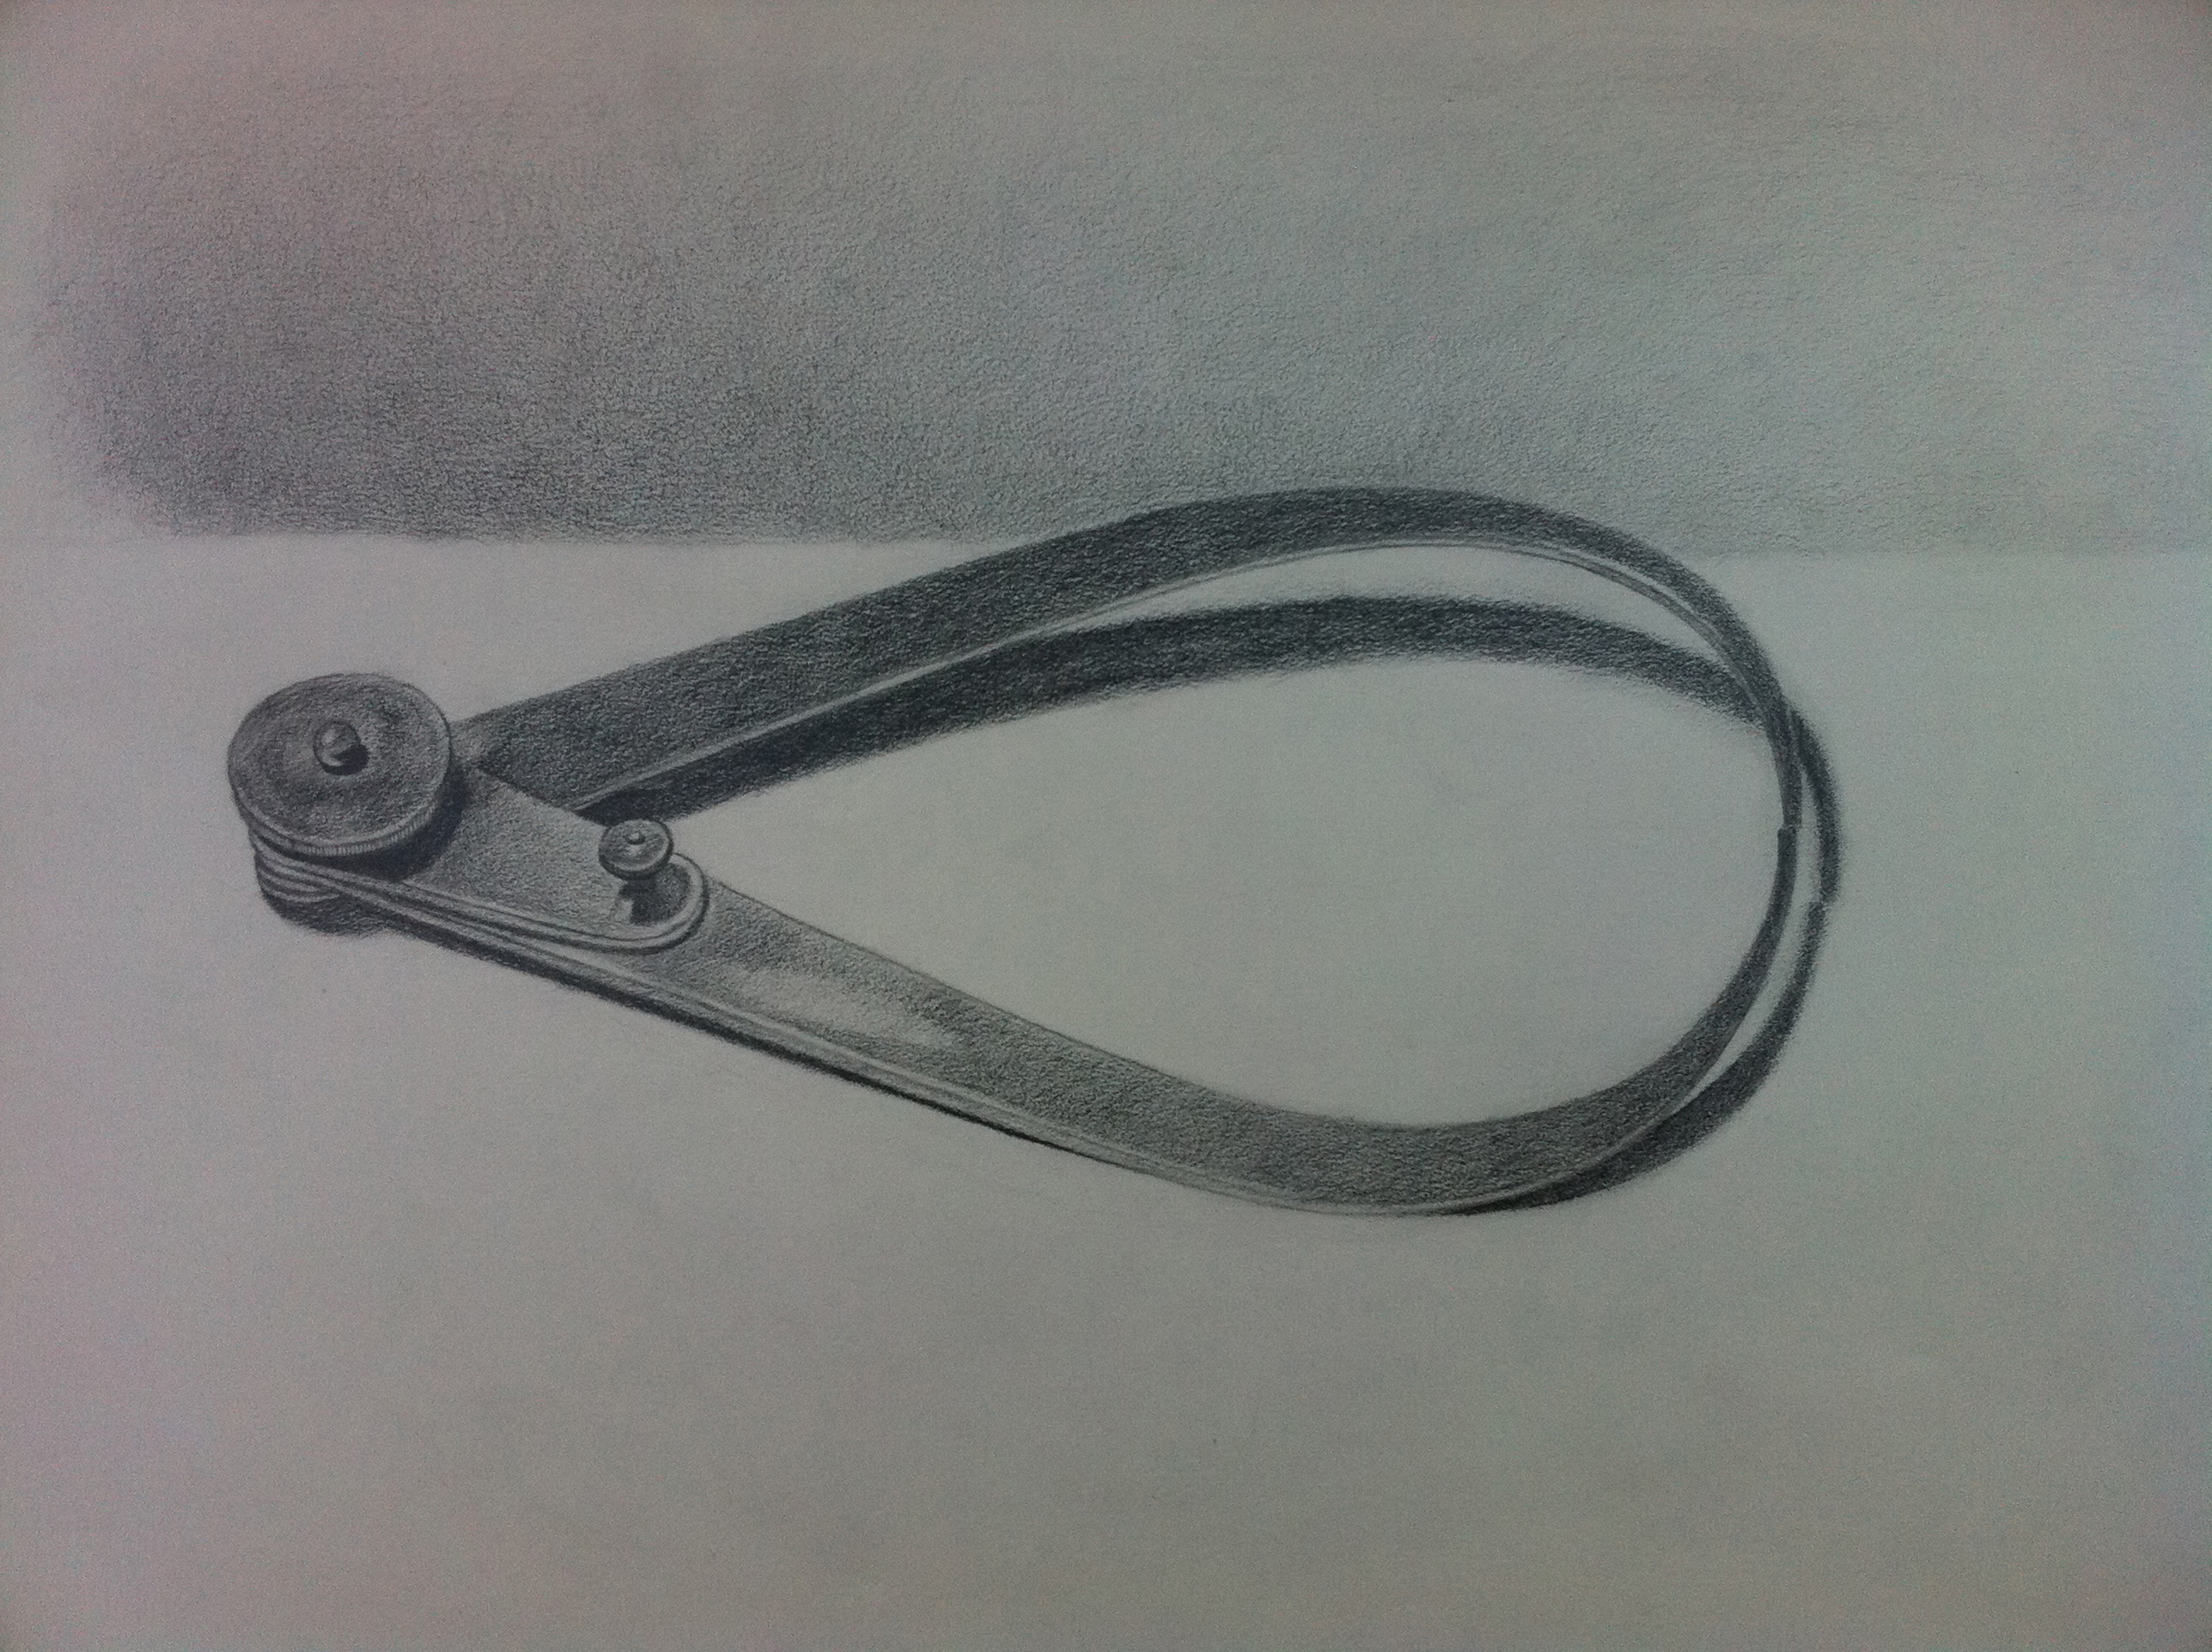  Calipers, graphite on paper 12" x 18"   